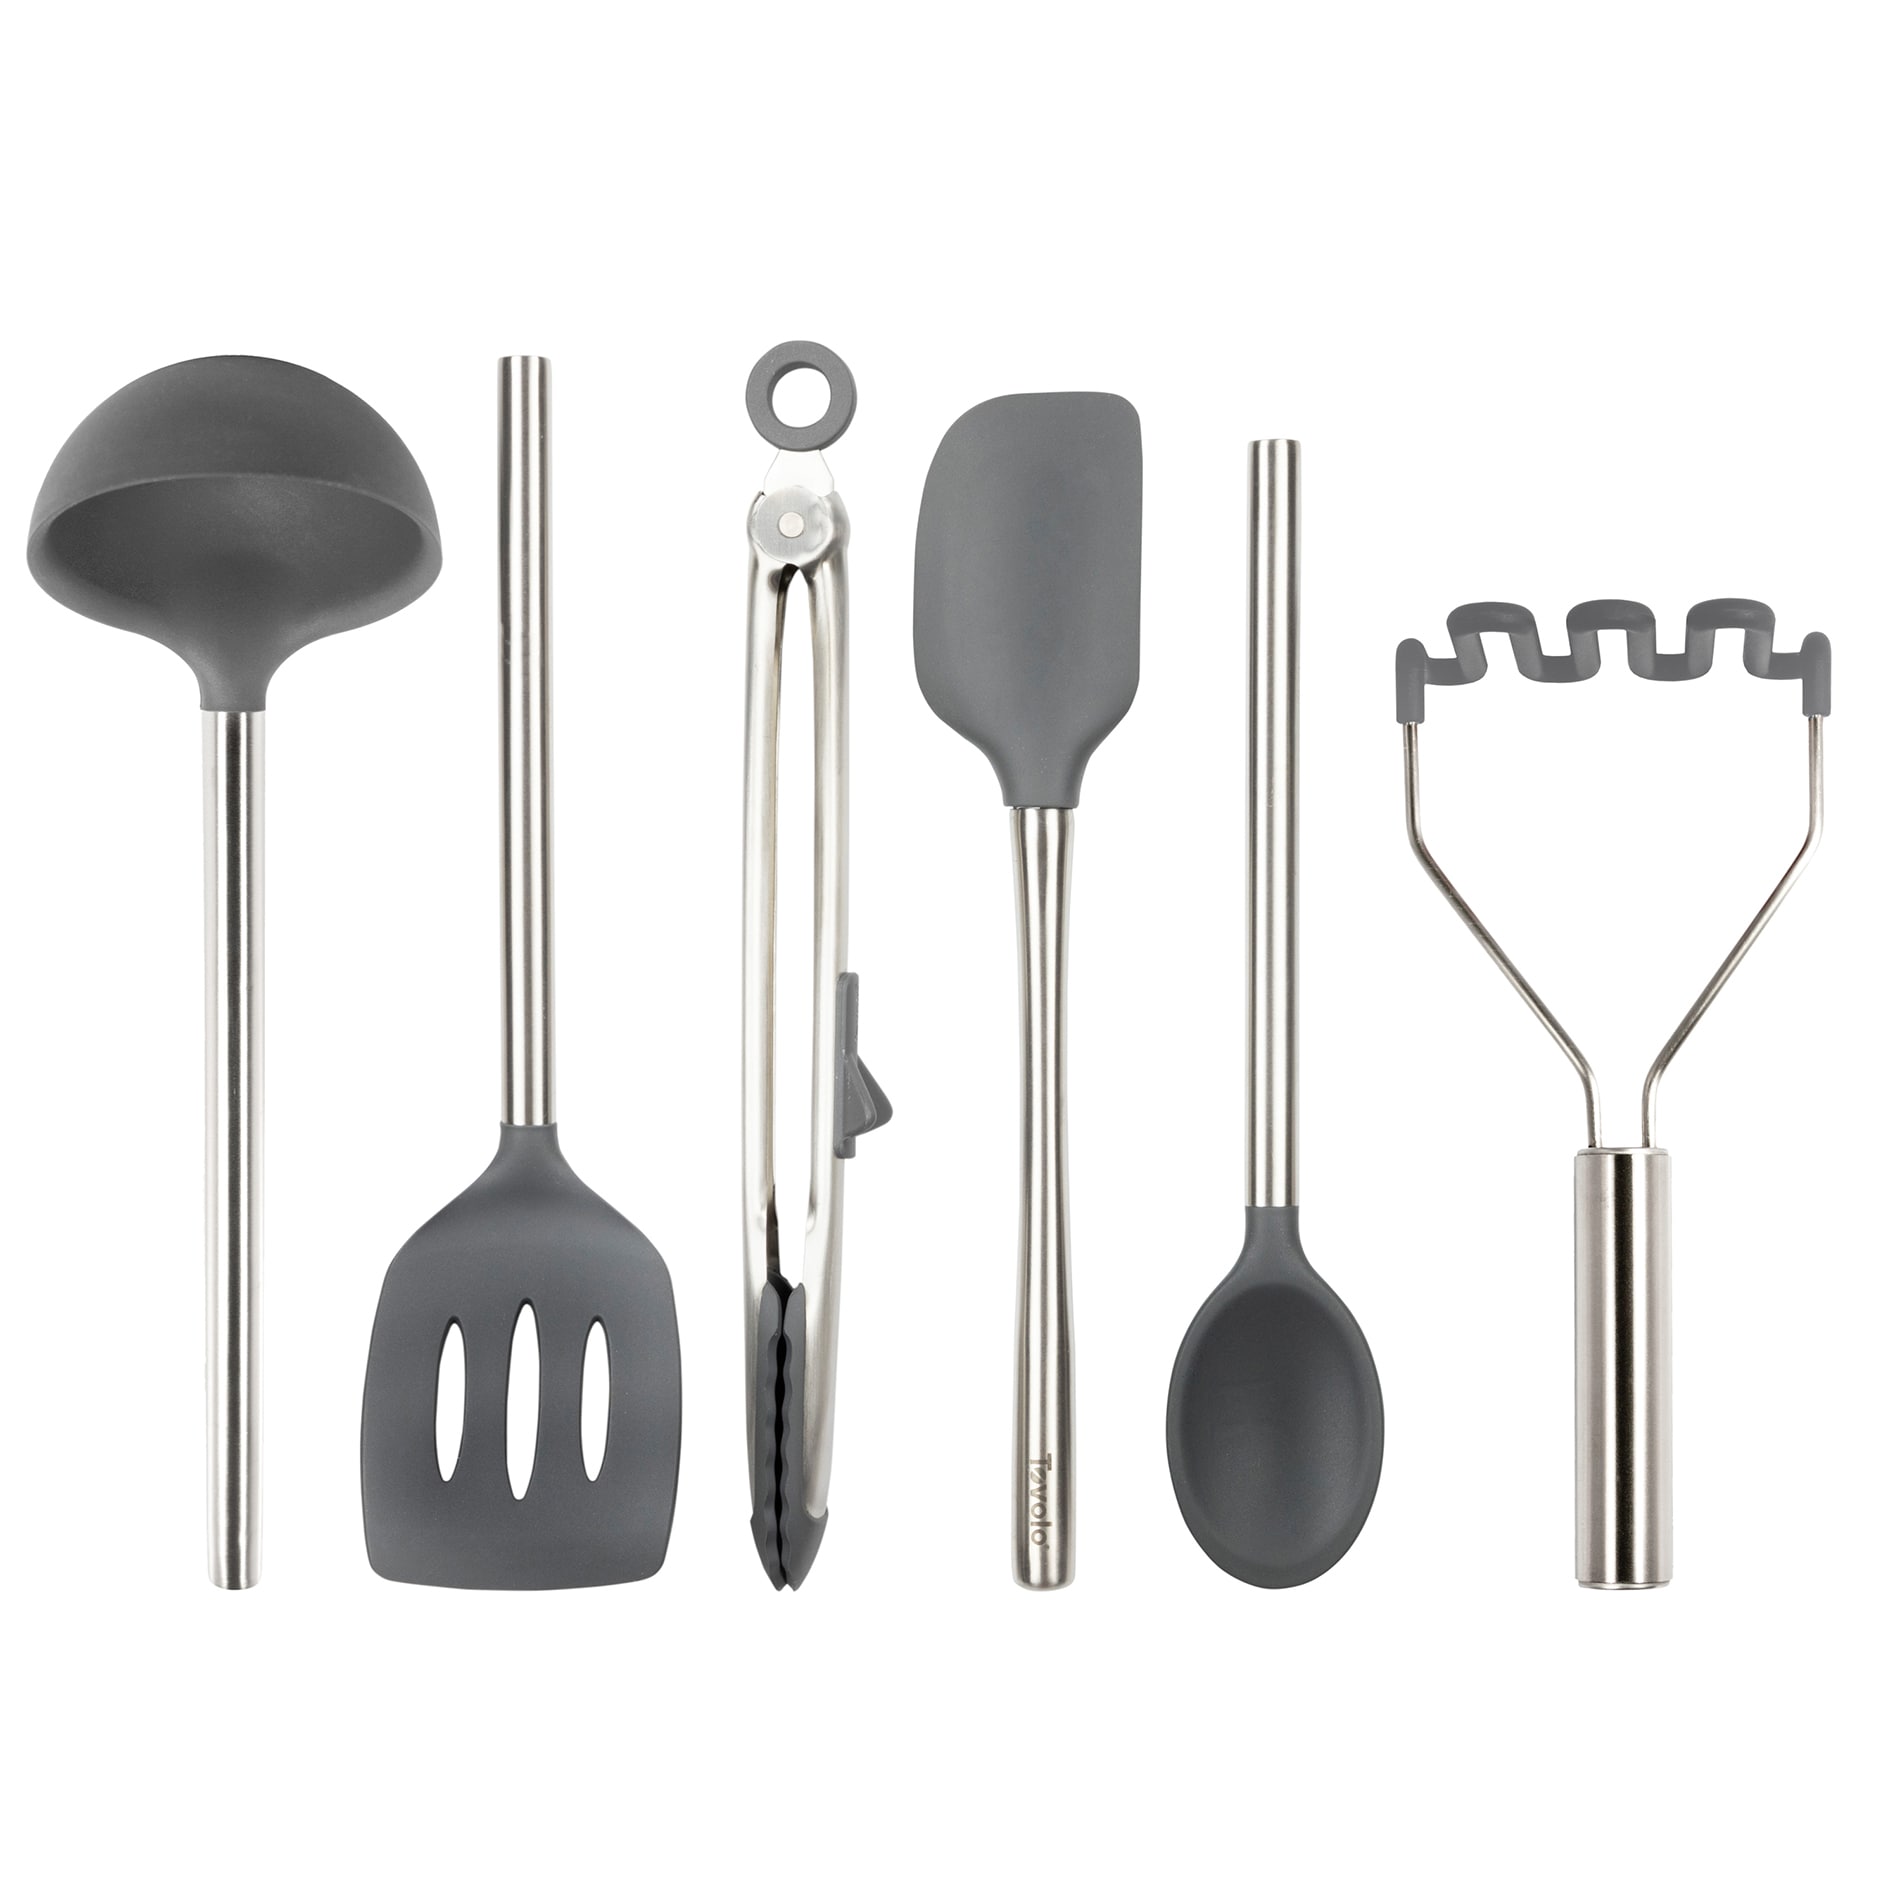 The 6 Best Kitchen Utensil Sets for Your Home - The Manual